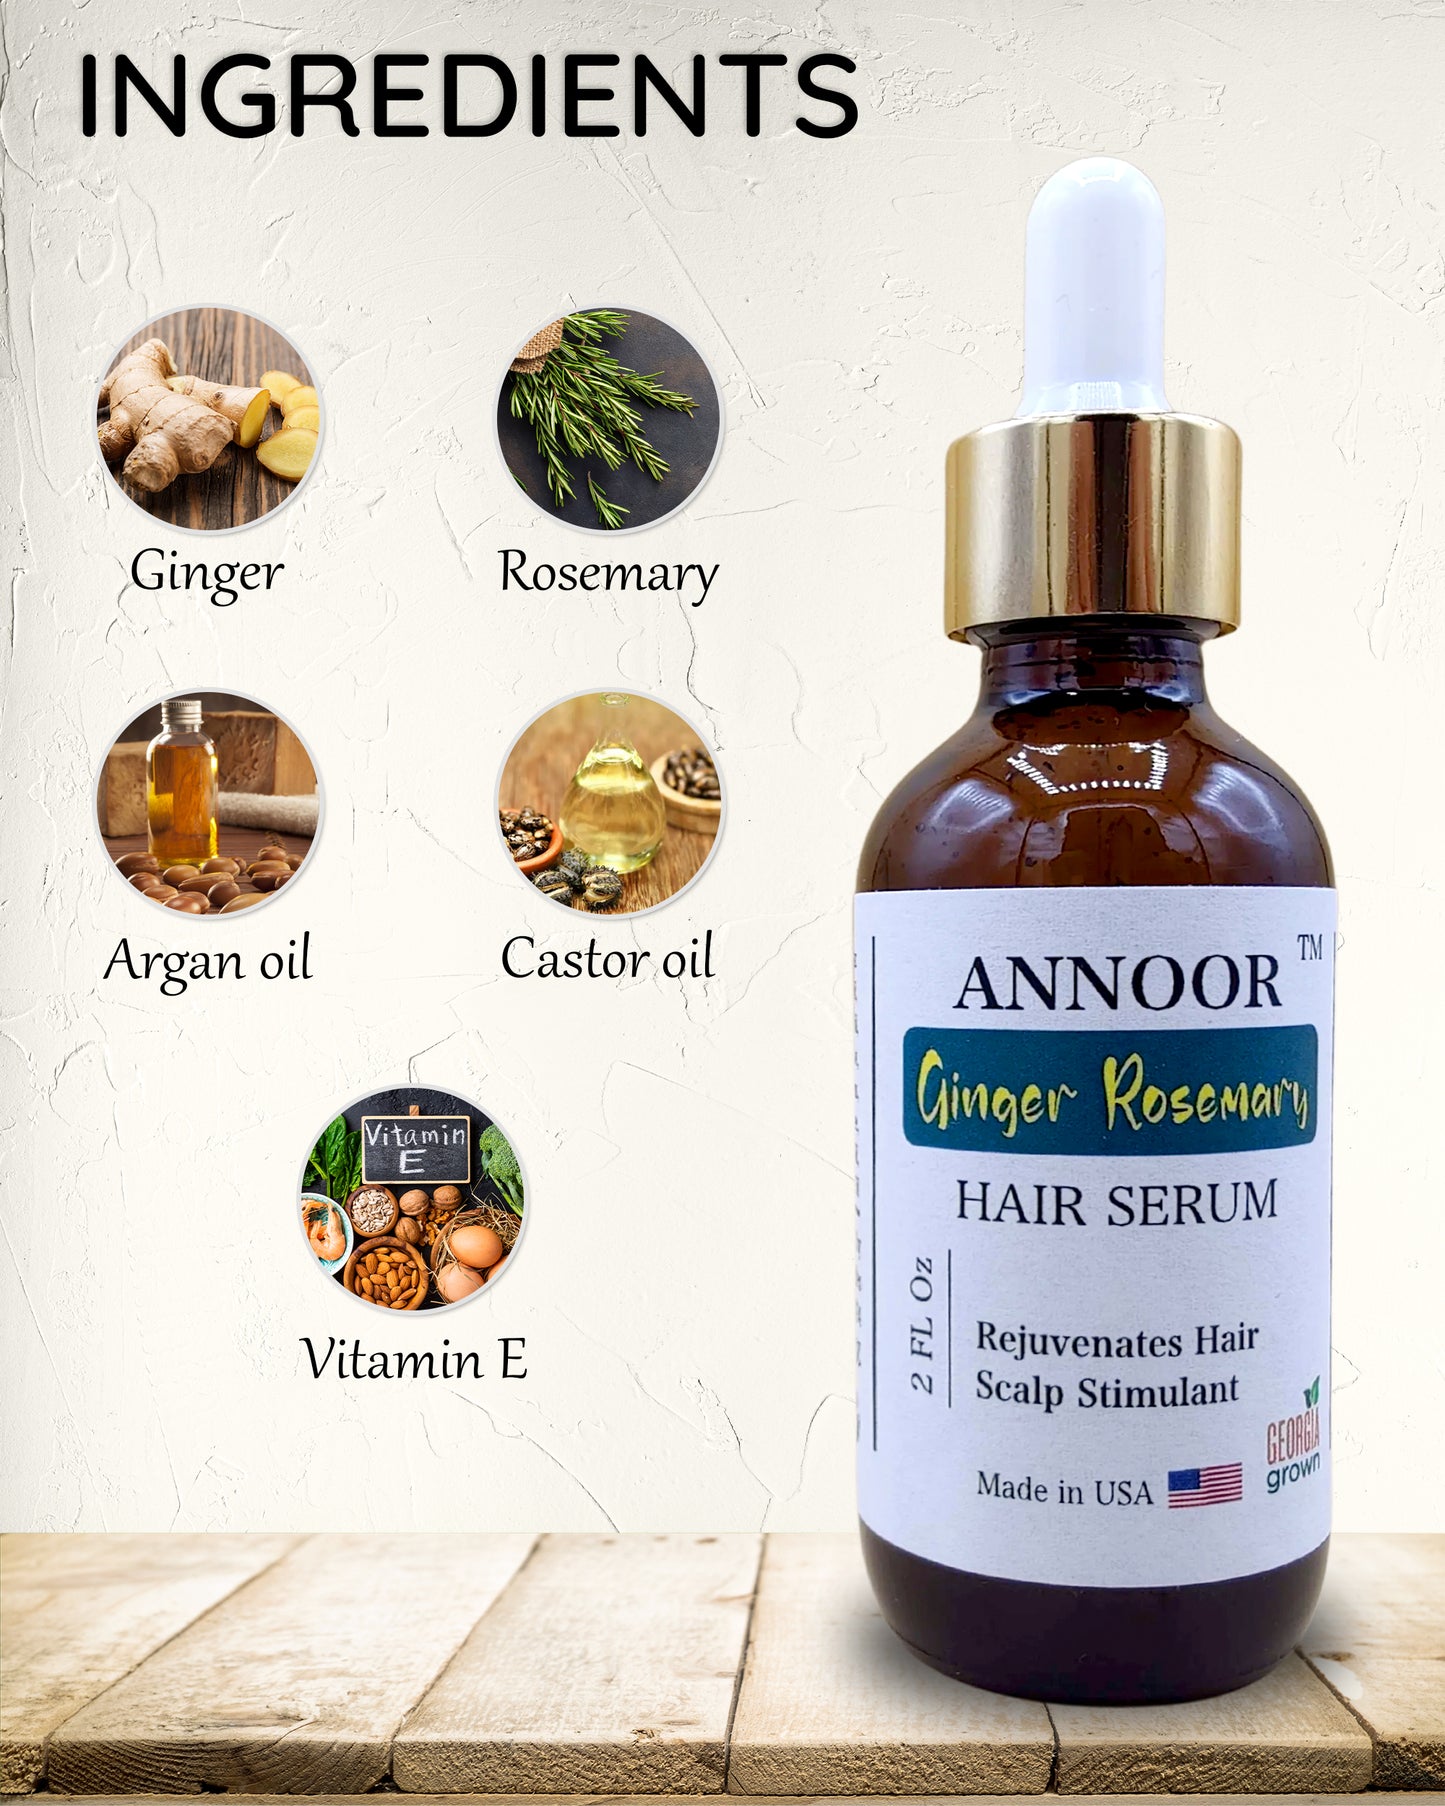 Ginger Rosemary Hair Serum by Annoor | 2 Fl Oz | Nourish, Strengthen, Shine, and Revitalize for Healthy Hair Growth and Scalp Renewal